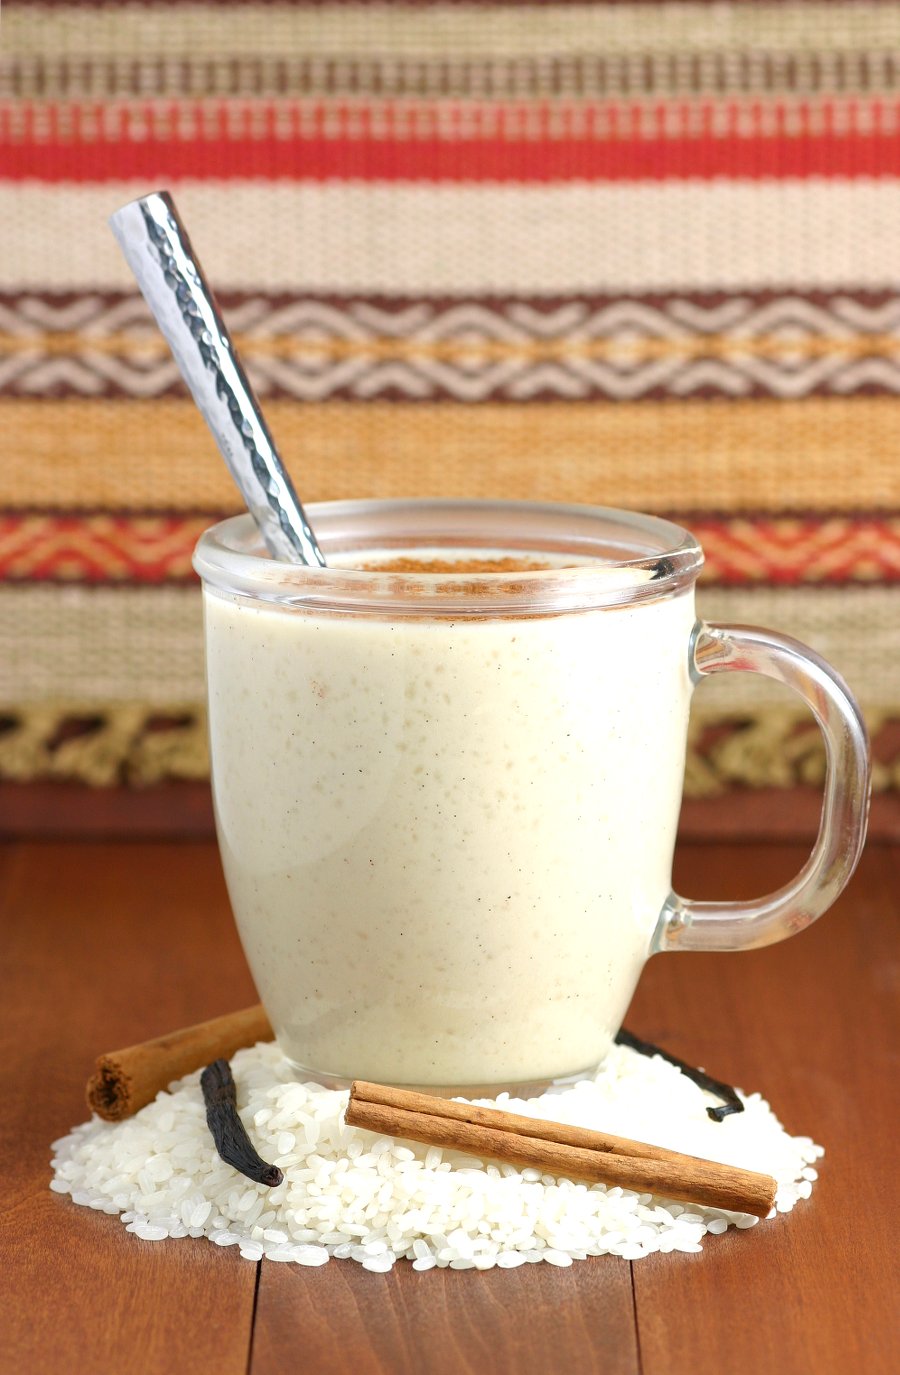 This Mexican Sweet Rice Drink (Atole de Arroz) is a creamy cinnamon and vanilla-infused hot beverage with a porridge-like consistency that's perfect cold weather days.